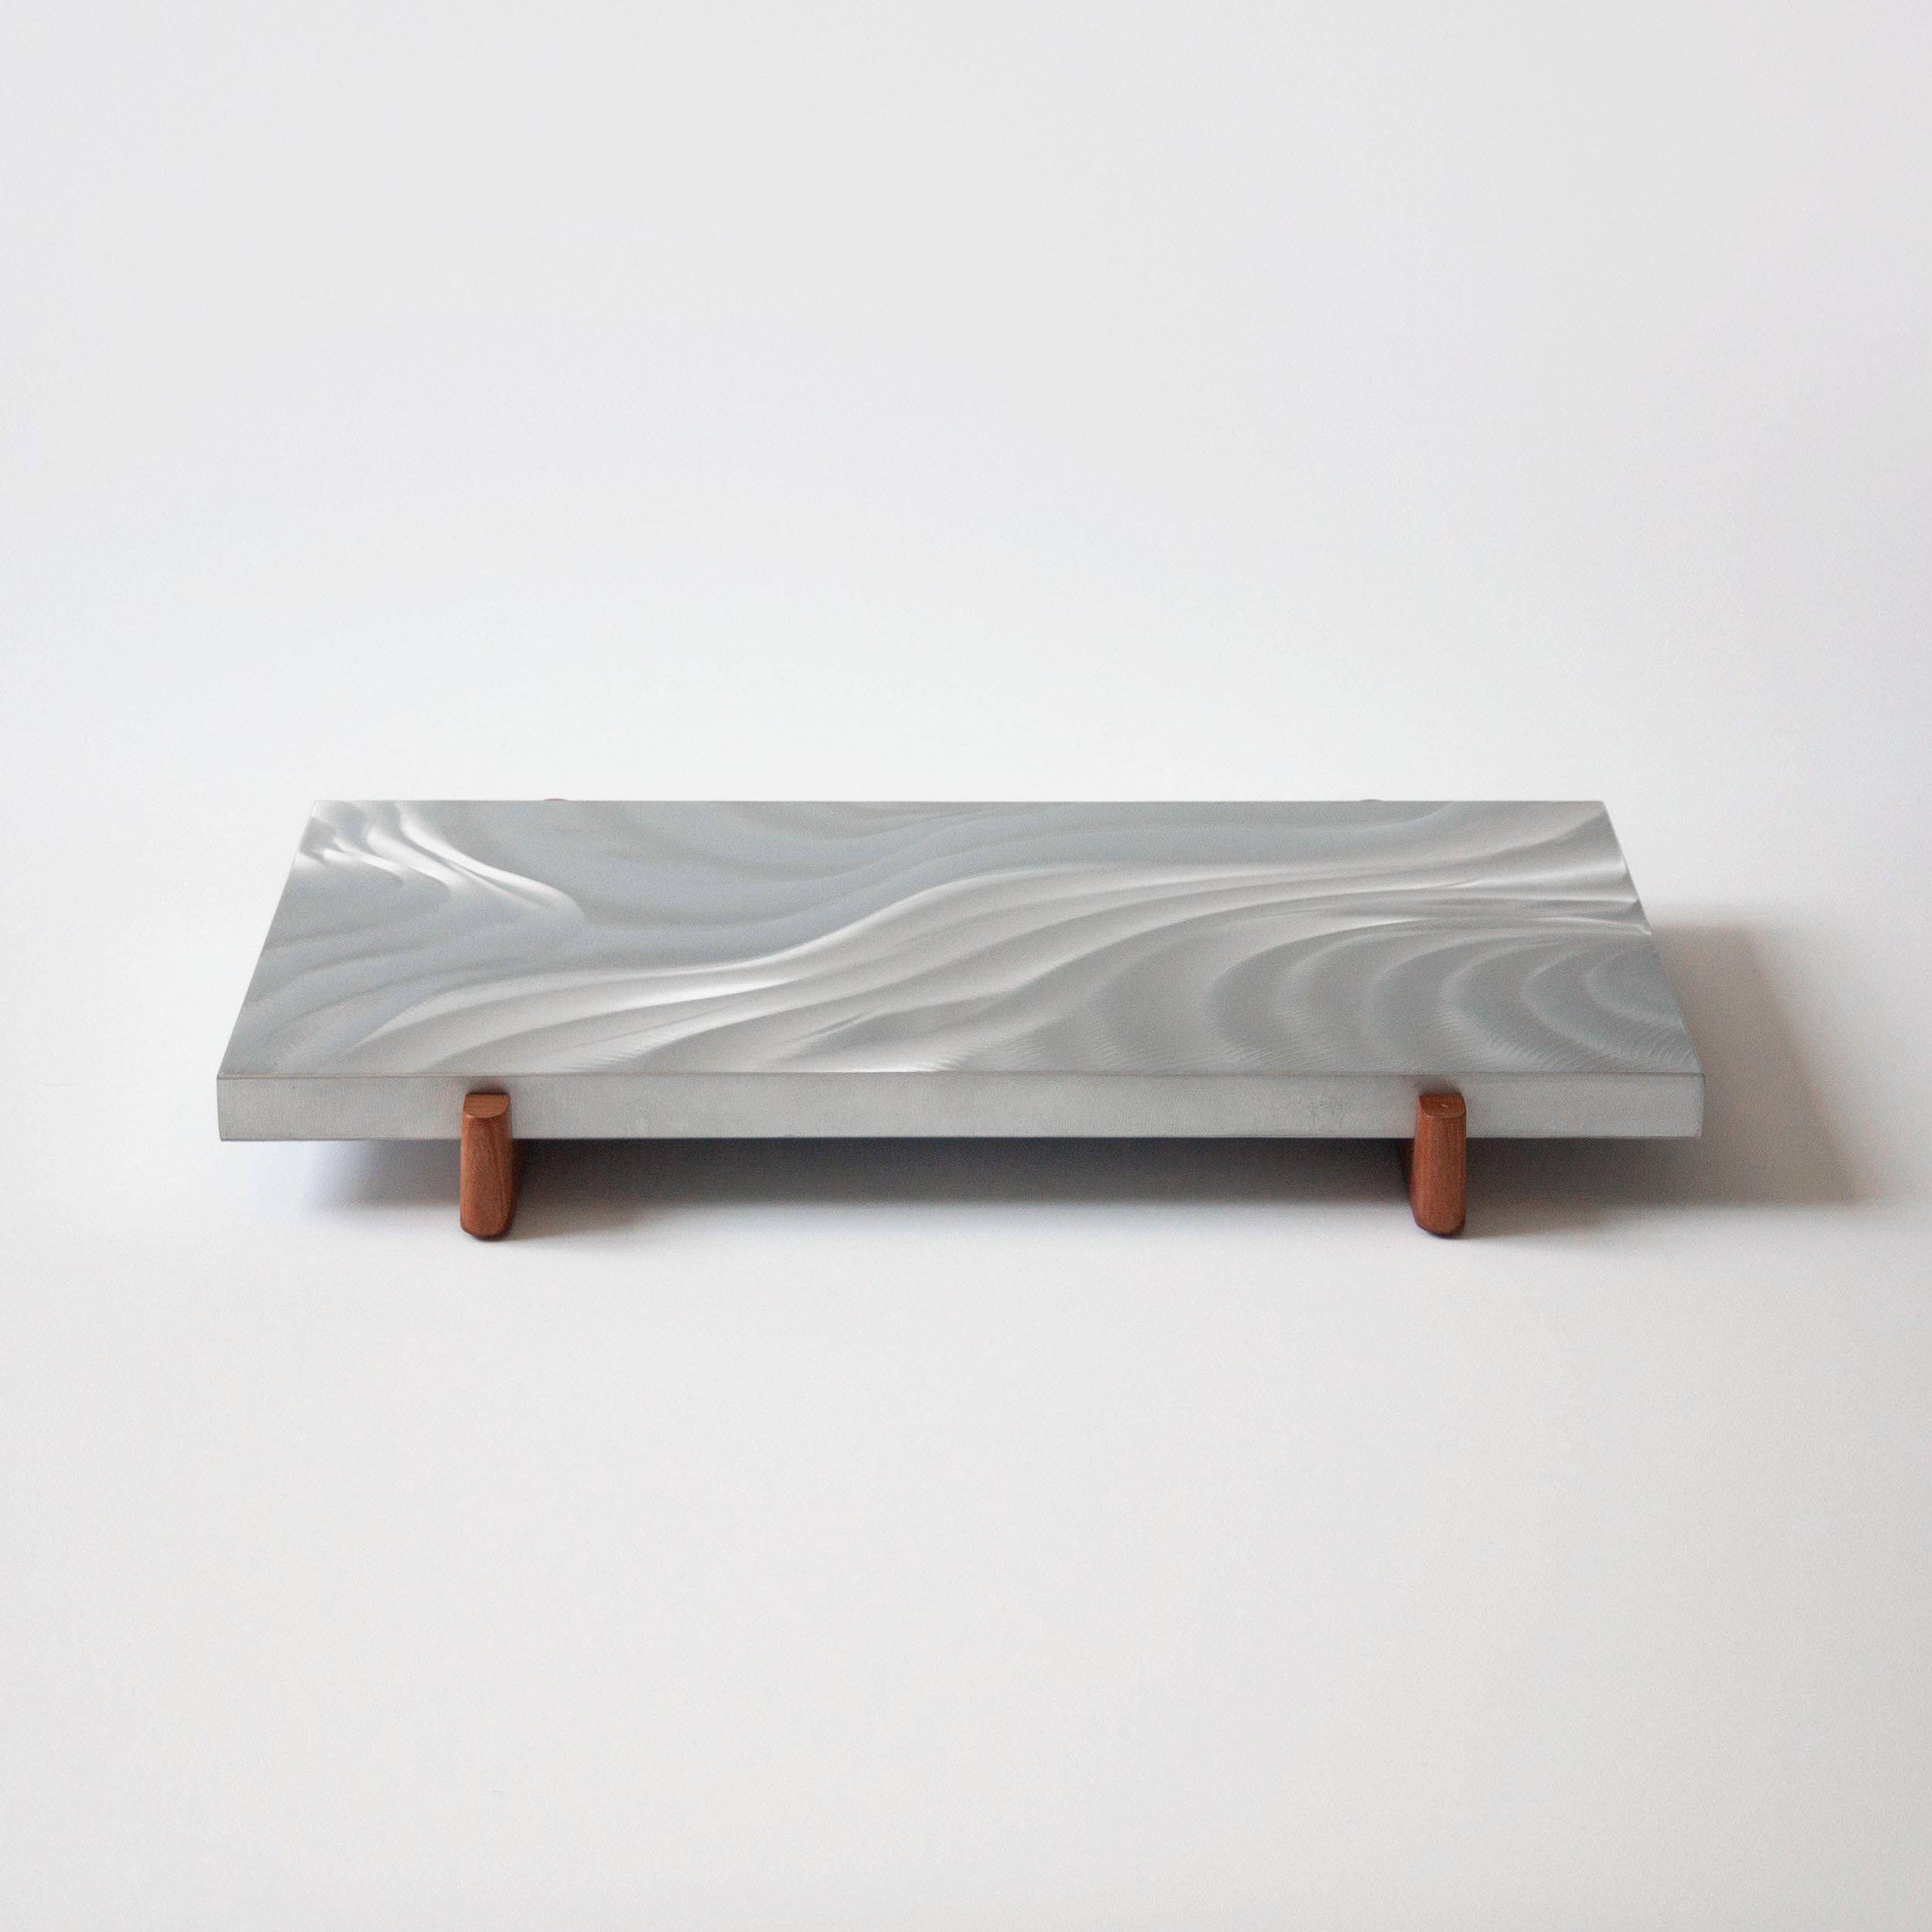 The Meltemi Tray – an offspring of the Meltemi cabinet – features the same experimental surface treatment. Like the Aegean winds, the tools and the metal surface dictate the final sculptural finish of this rectangular tray.

! Please note that the